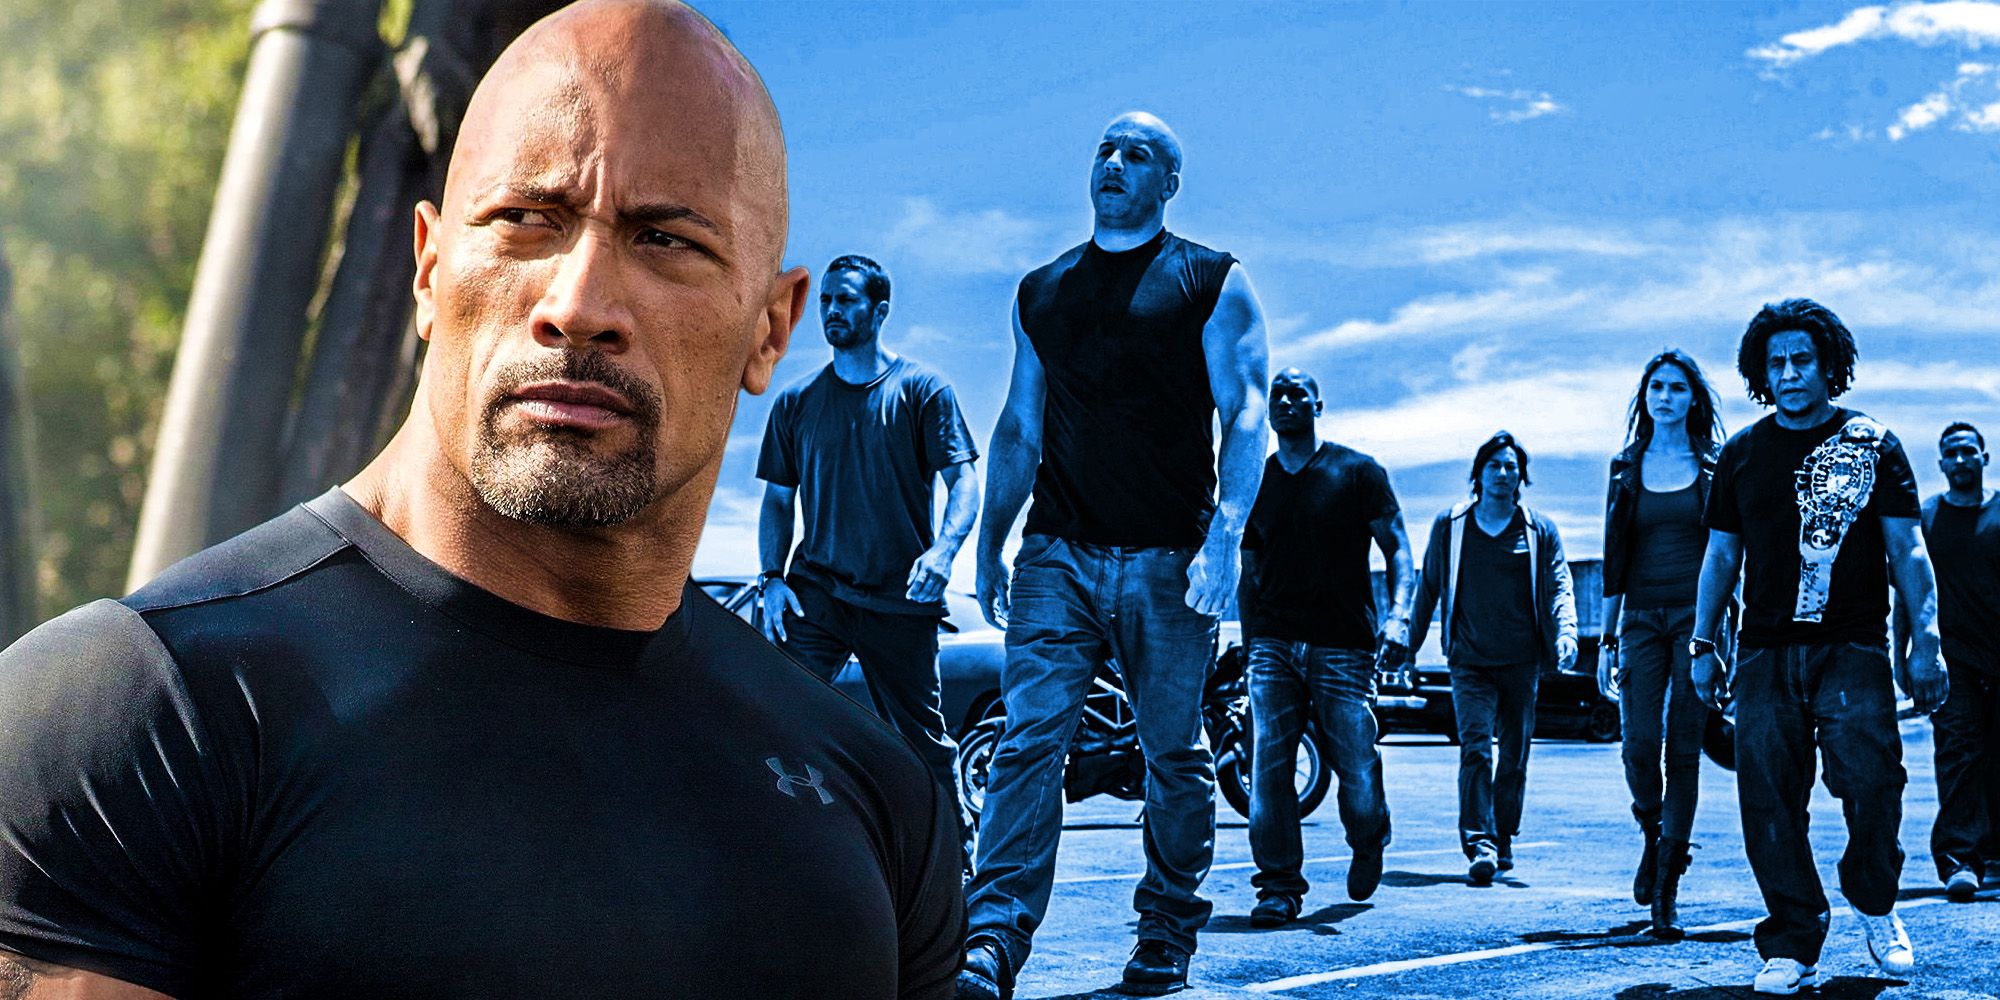 Fast and furious 10 what to expect The Rock Vin Diesel